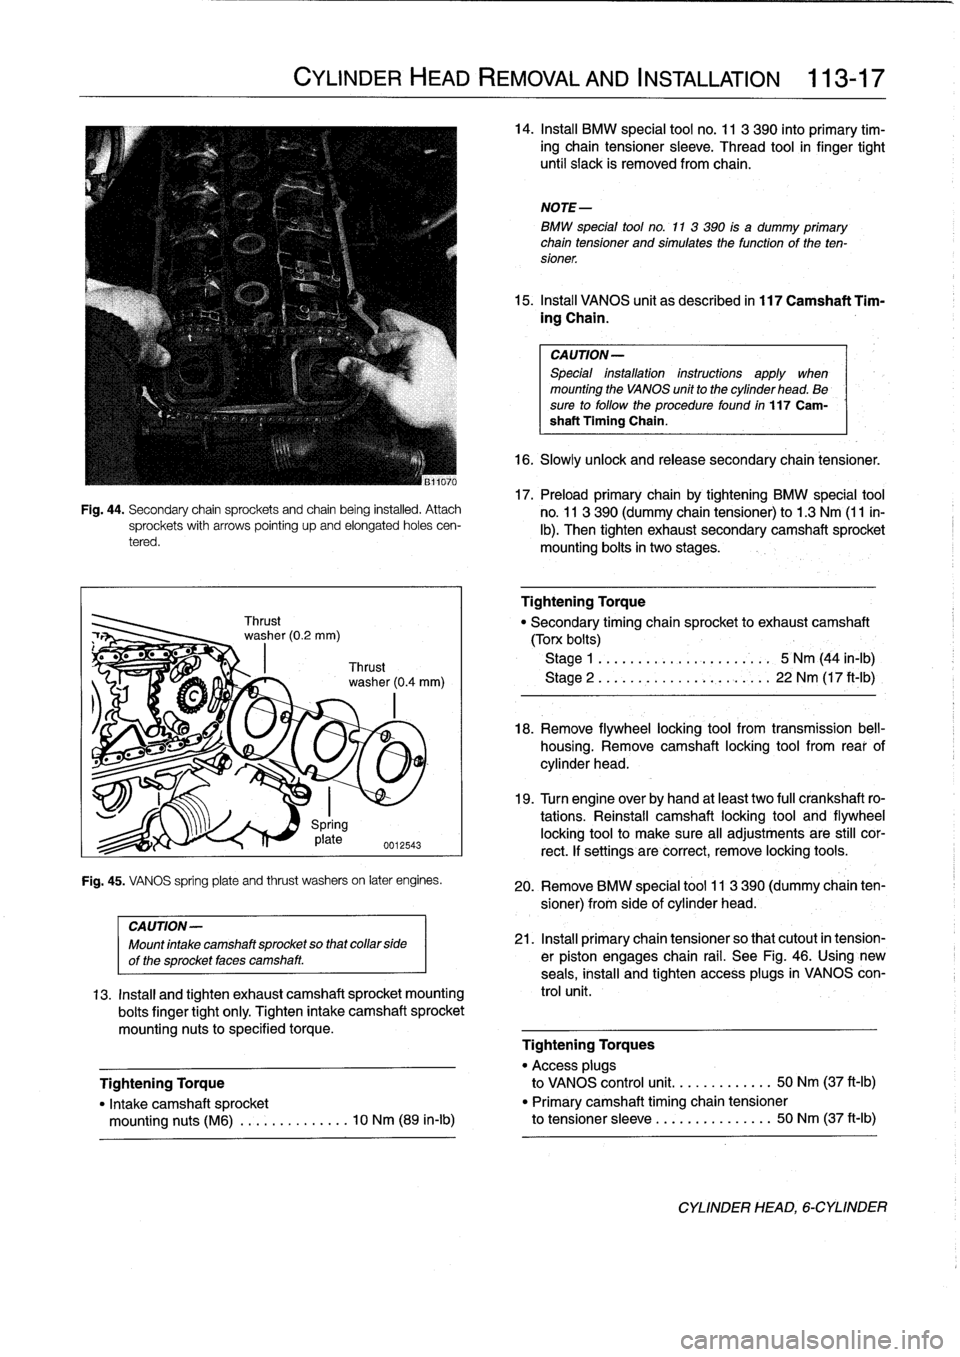 BMW 323i 1997 E36 Manual PDF 
Fig
.
44
.
Secondary
chain
sprockets
and
chain
being
installed
.
Attachsprockets
with
arrows
pointing
upand
elongated
holes
cen-
tered
.

CYLINDER
HEAD
REMOVAL
AND
INSTALLATION

	

113-17

Spring
17
